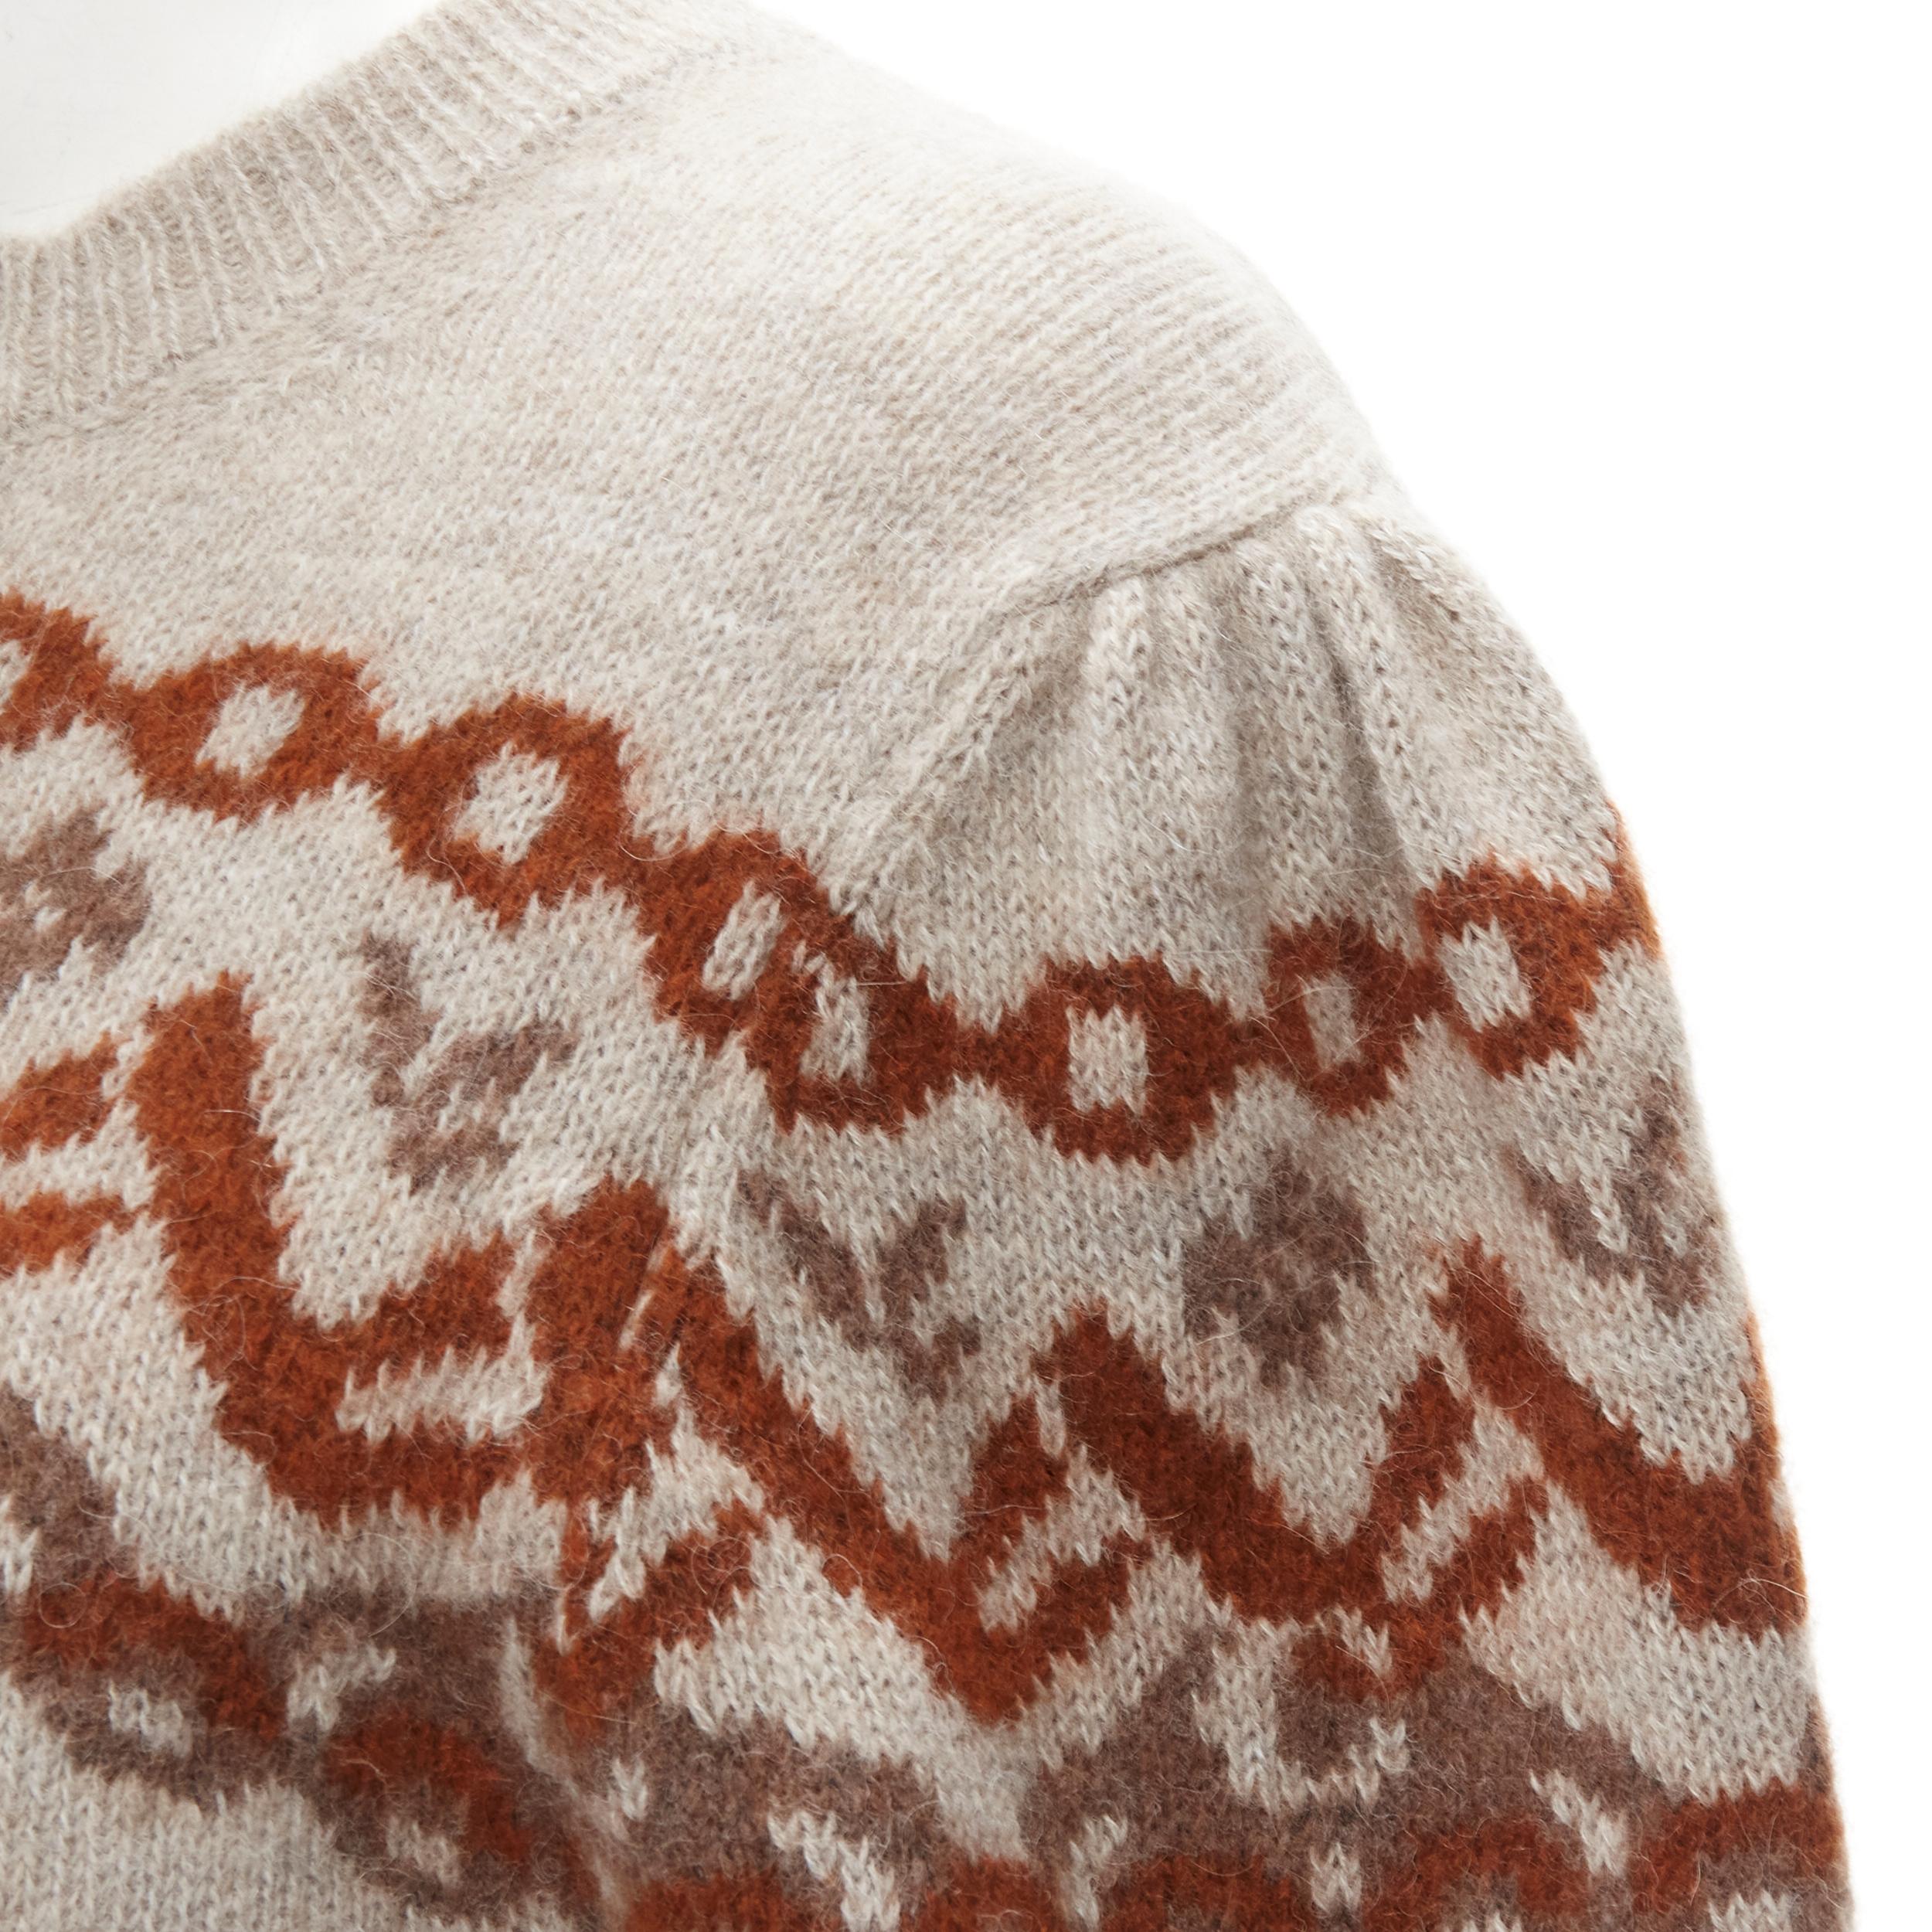 CHLOE alpaca wool stone grey orange fairisle victorian puff sleeve sweater M
Brand: Chloe
Material: Alpaca
Color: Grey
Pattern: Fairisle
Extra Detail: Puff sleeve design. Ribbed sleeve and hem.
Made in: Italy

CONDITION:
Condition: Excellent, this